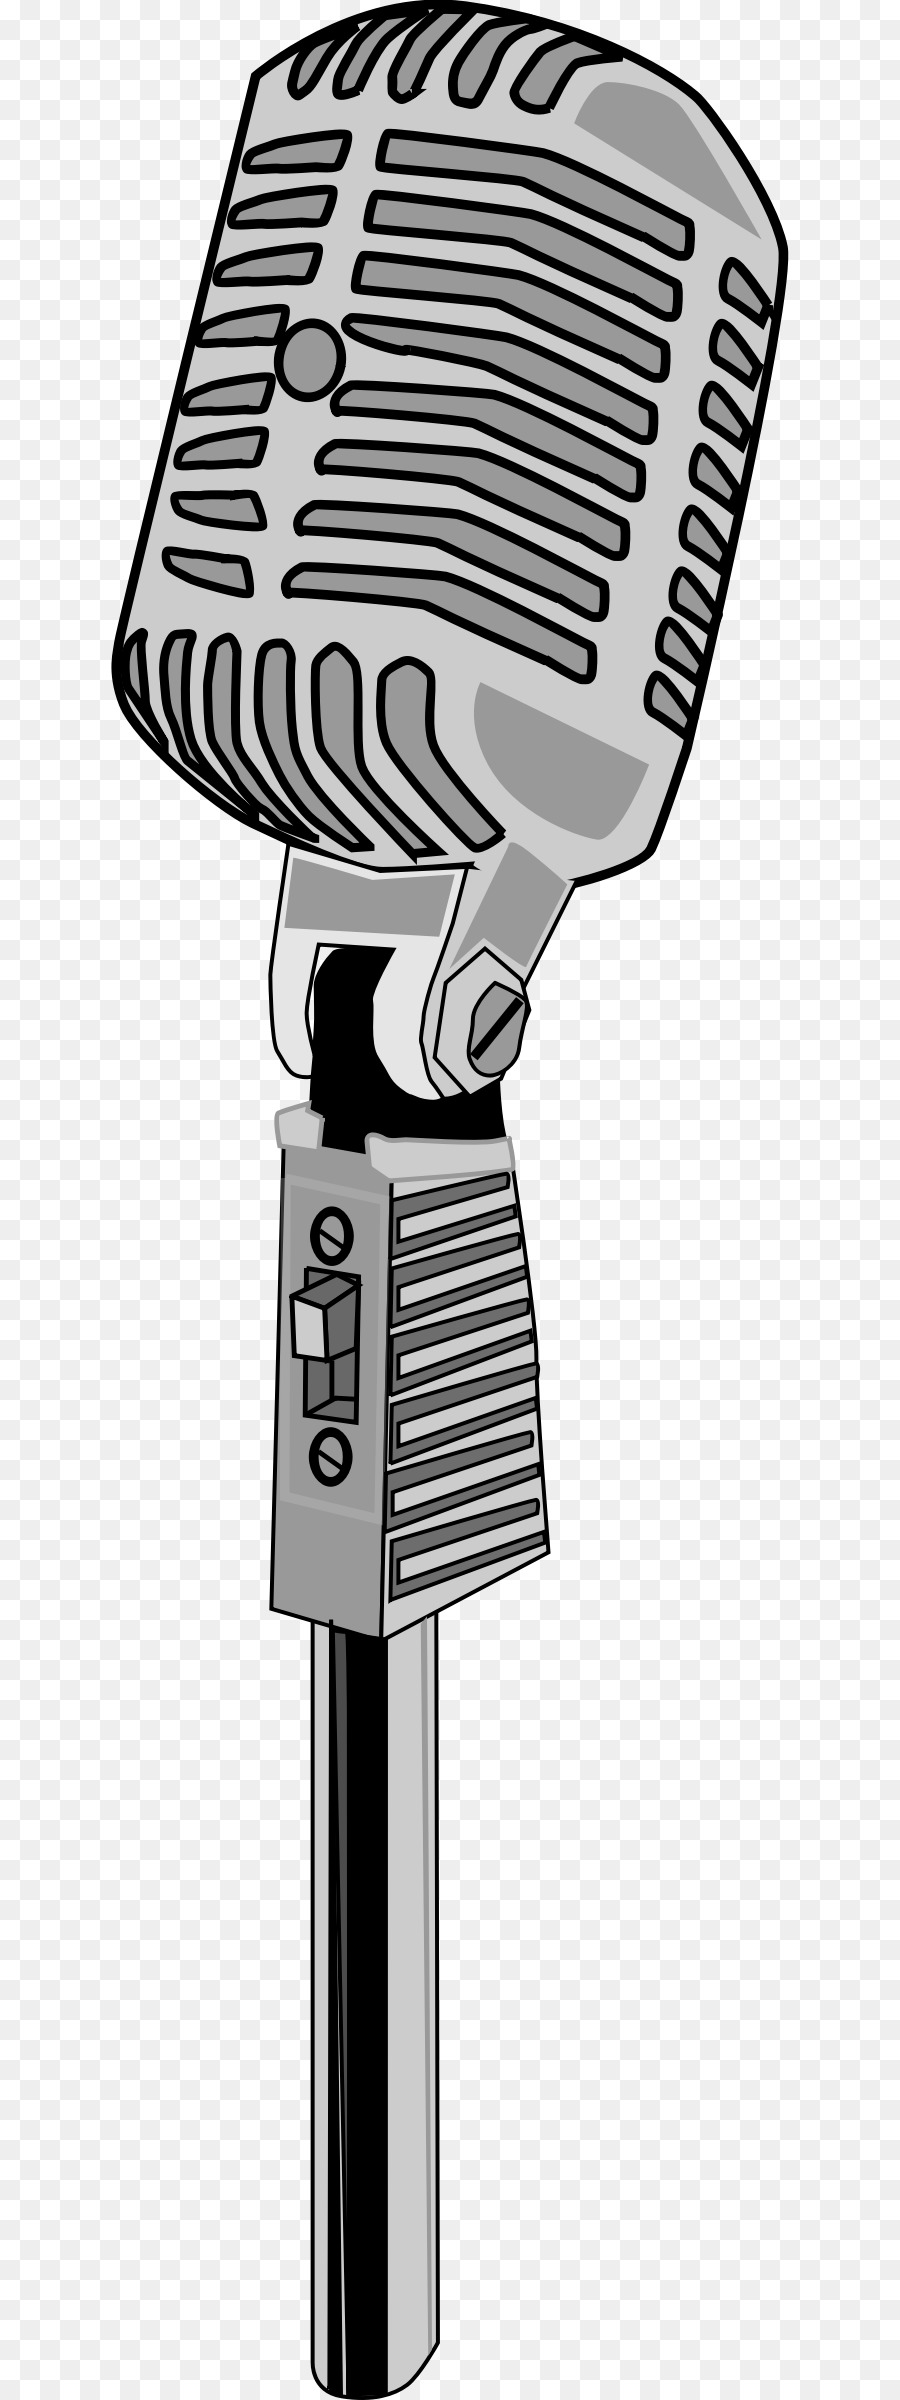 Microphone Clip art - mic png download - 678*2400 - Free Transparent  png Download.